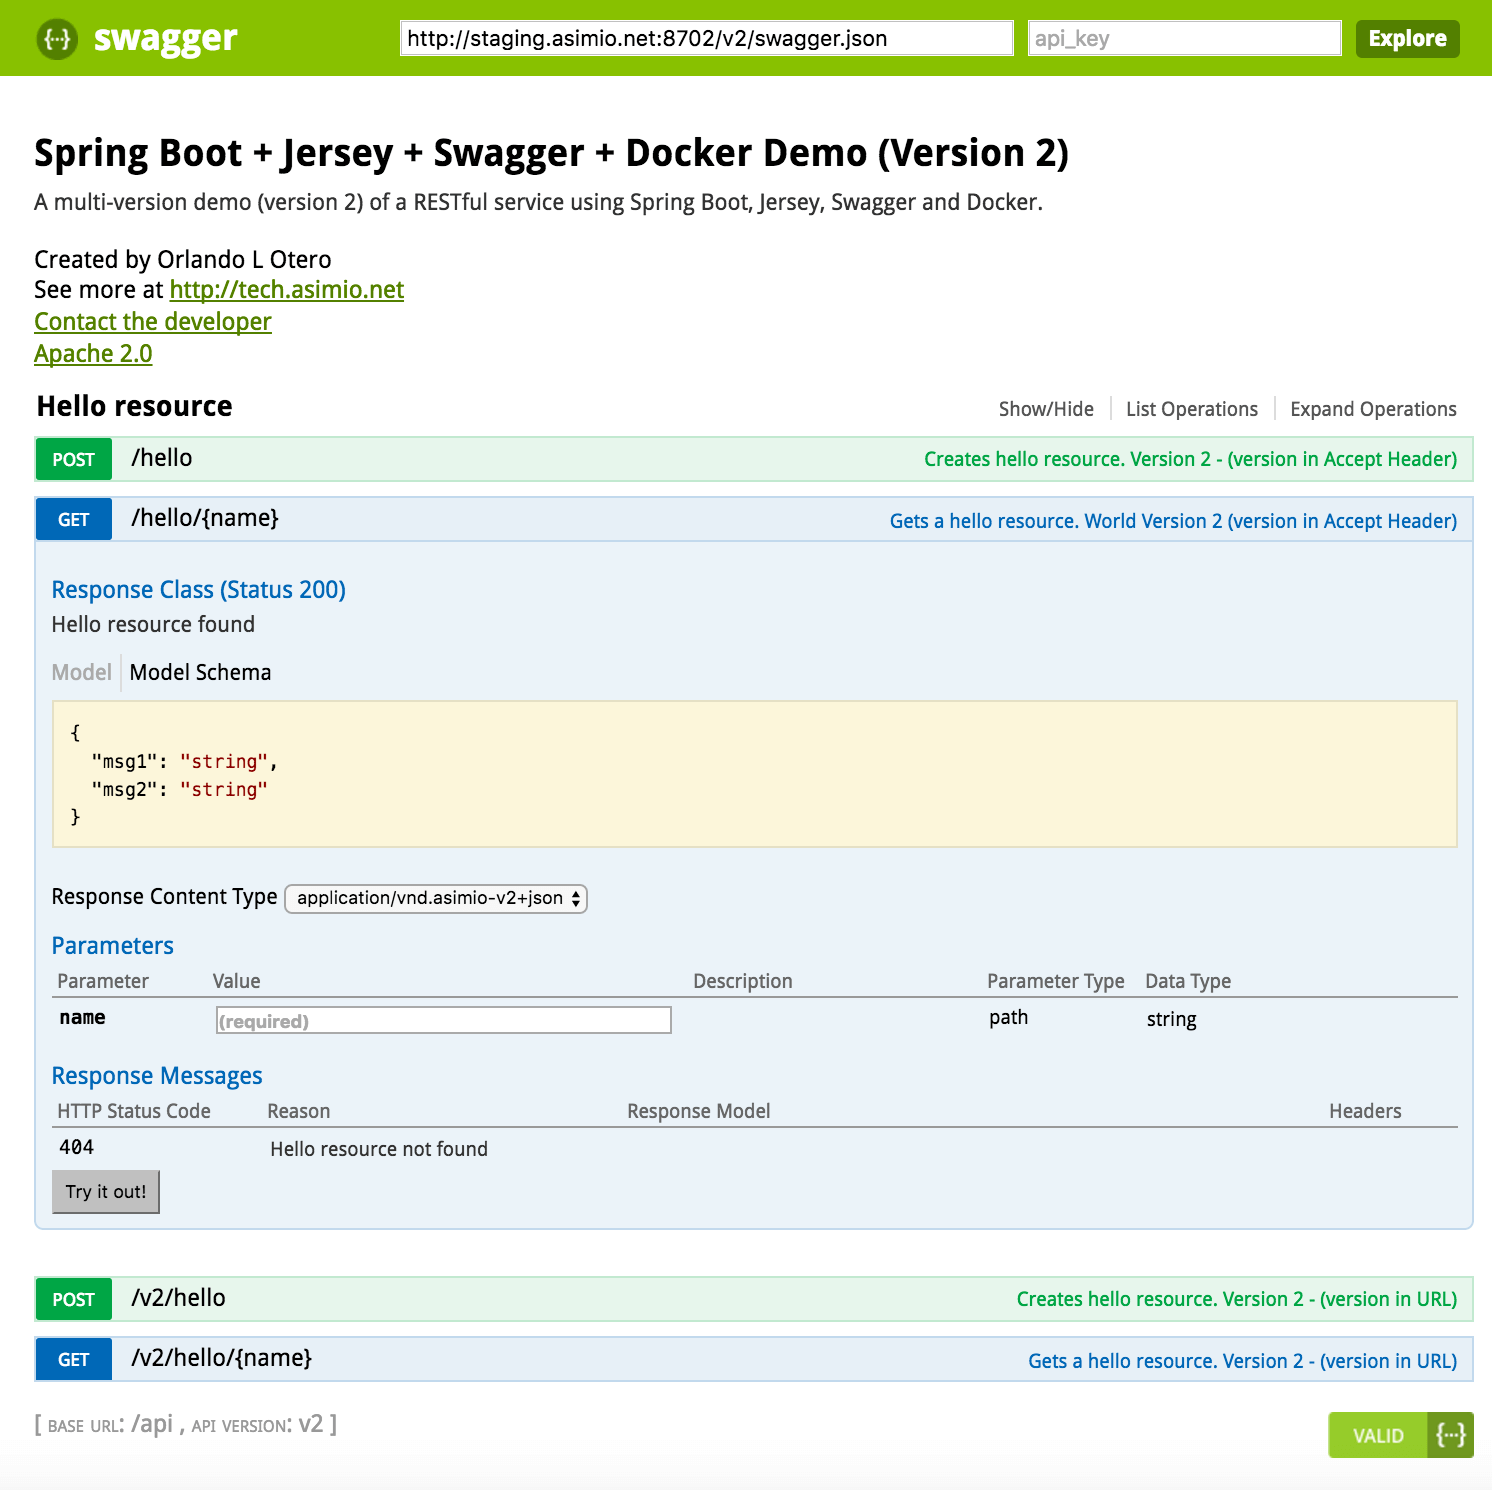 Spring Boot, Jersey, Swagger - Get resource - Version in Accept Header